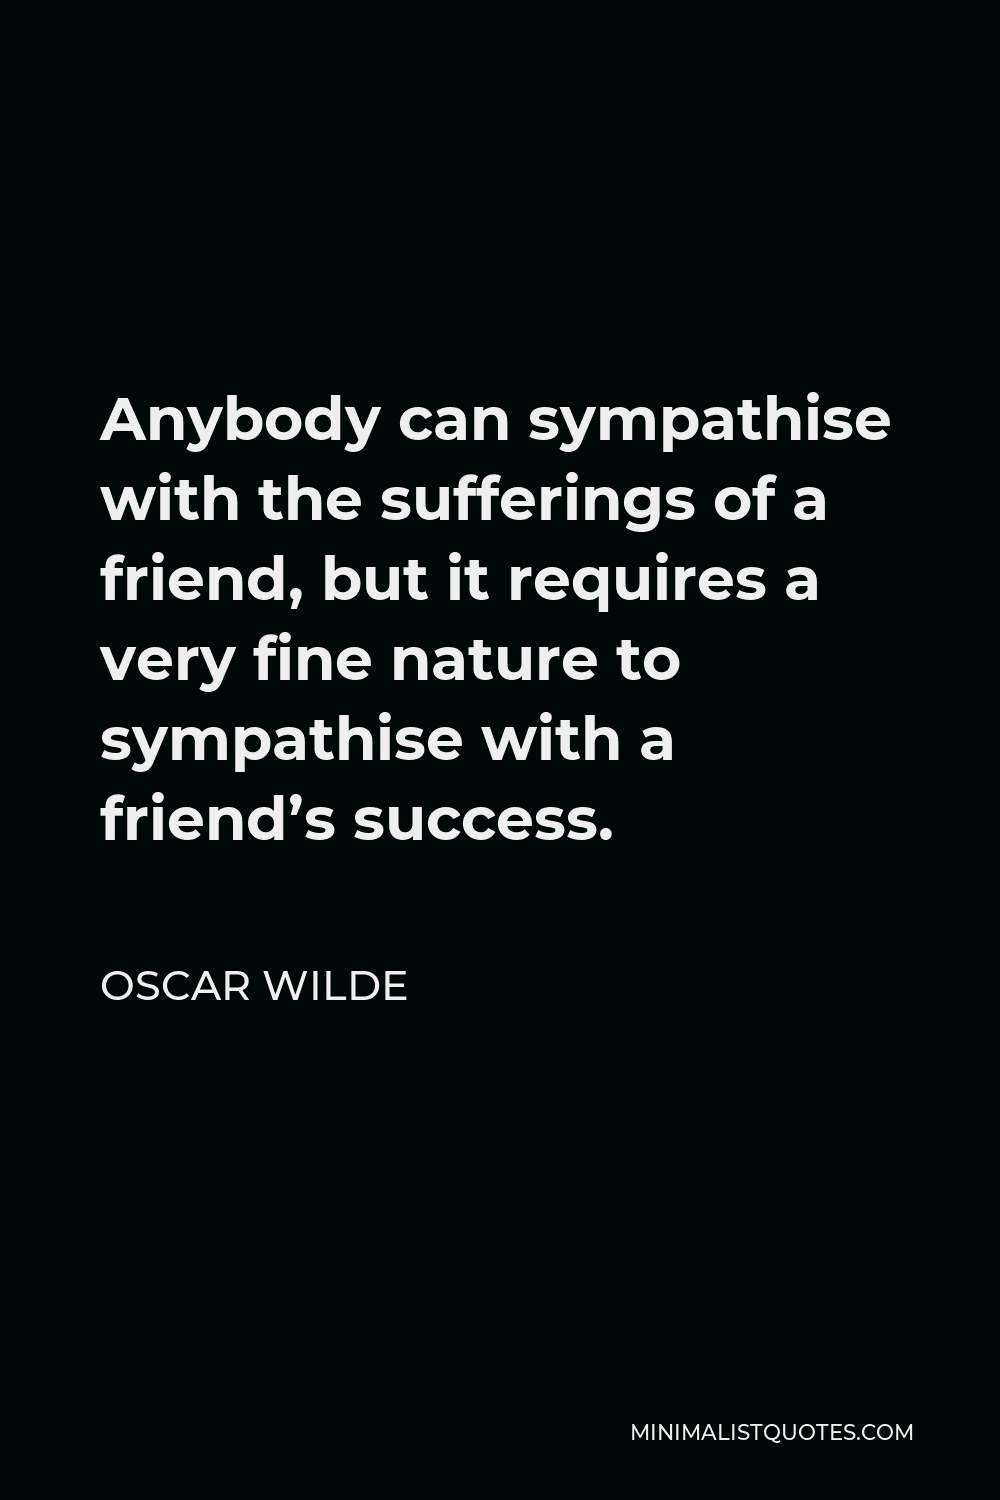 Oscar Wilde Quote - Anybody can sympathise with the sufferings of a friend, but it requires a very fine nature to sympathise with a friend’s success.